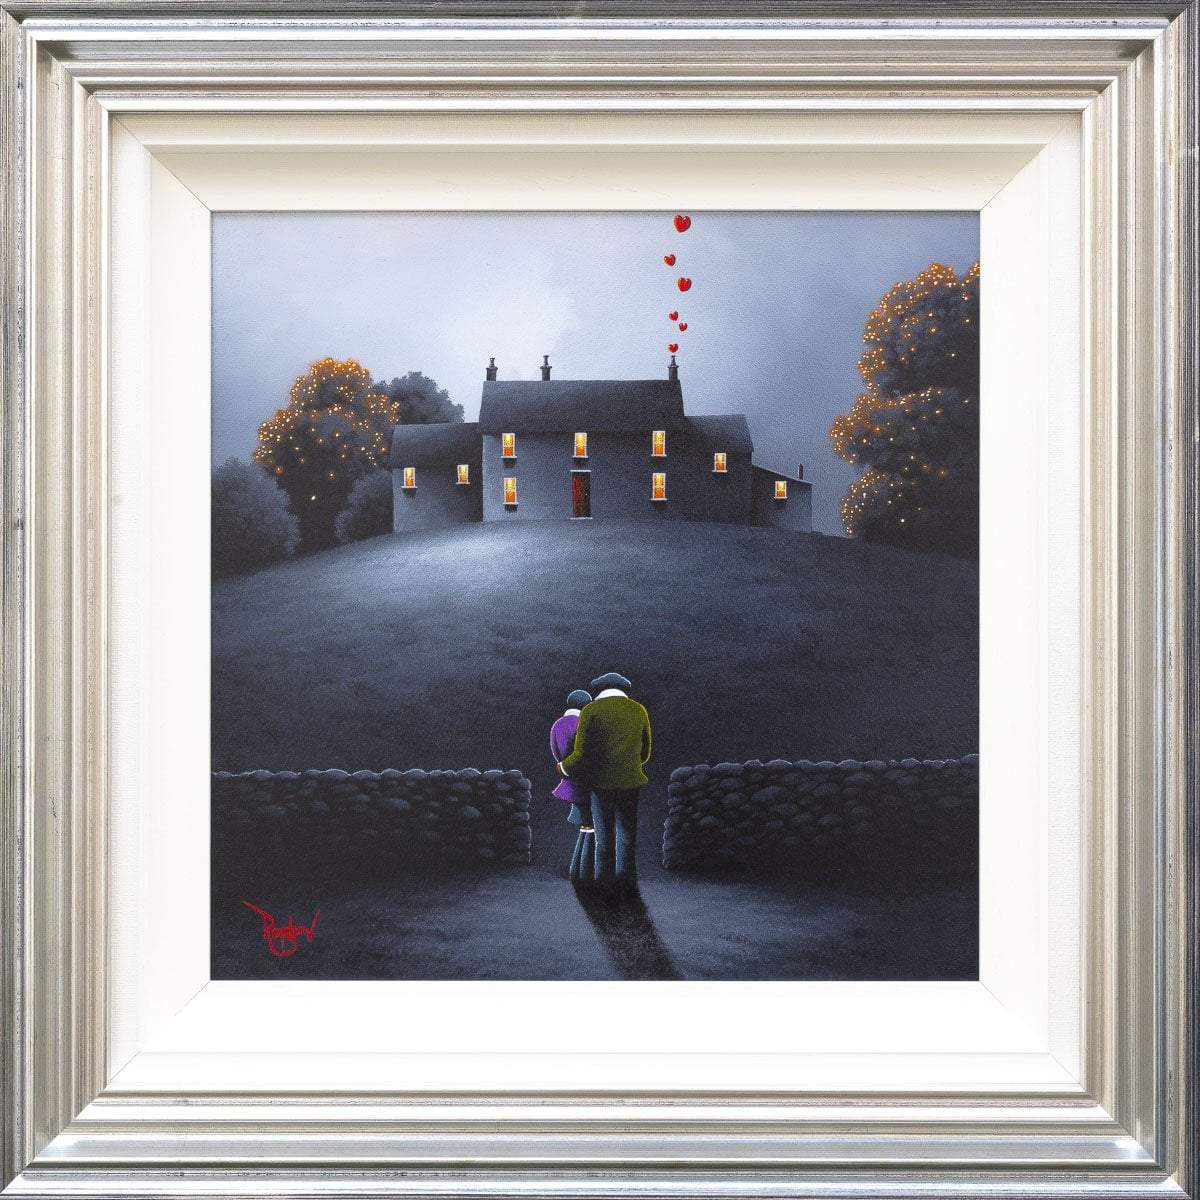 Moments With You - Original David Renshaw Framed